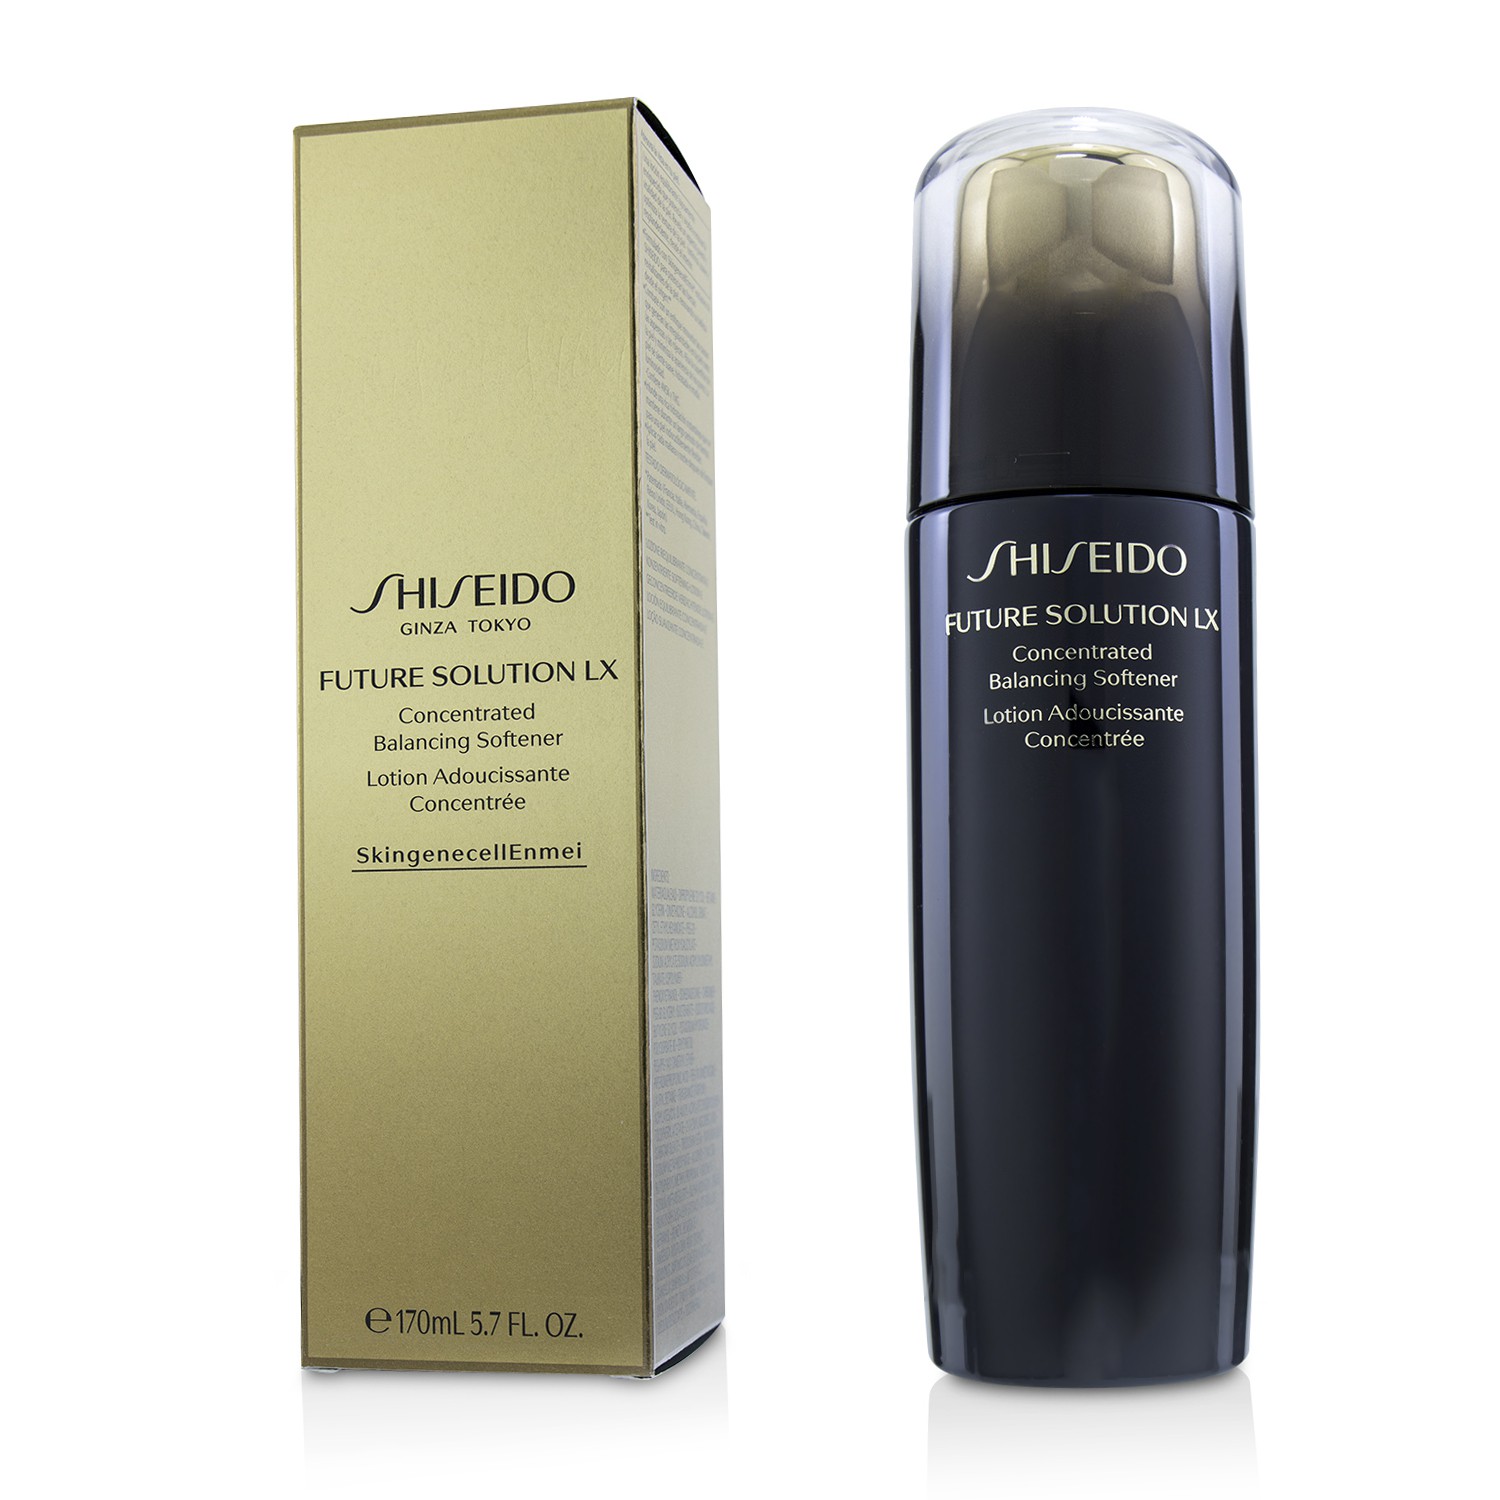 Future Solution LX Concentrated Balancing Softener Shiseido Image